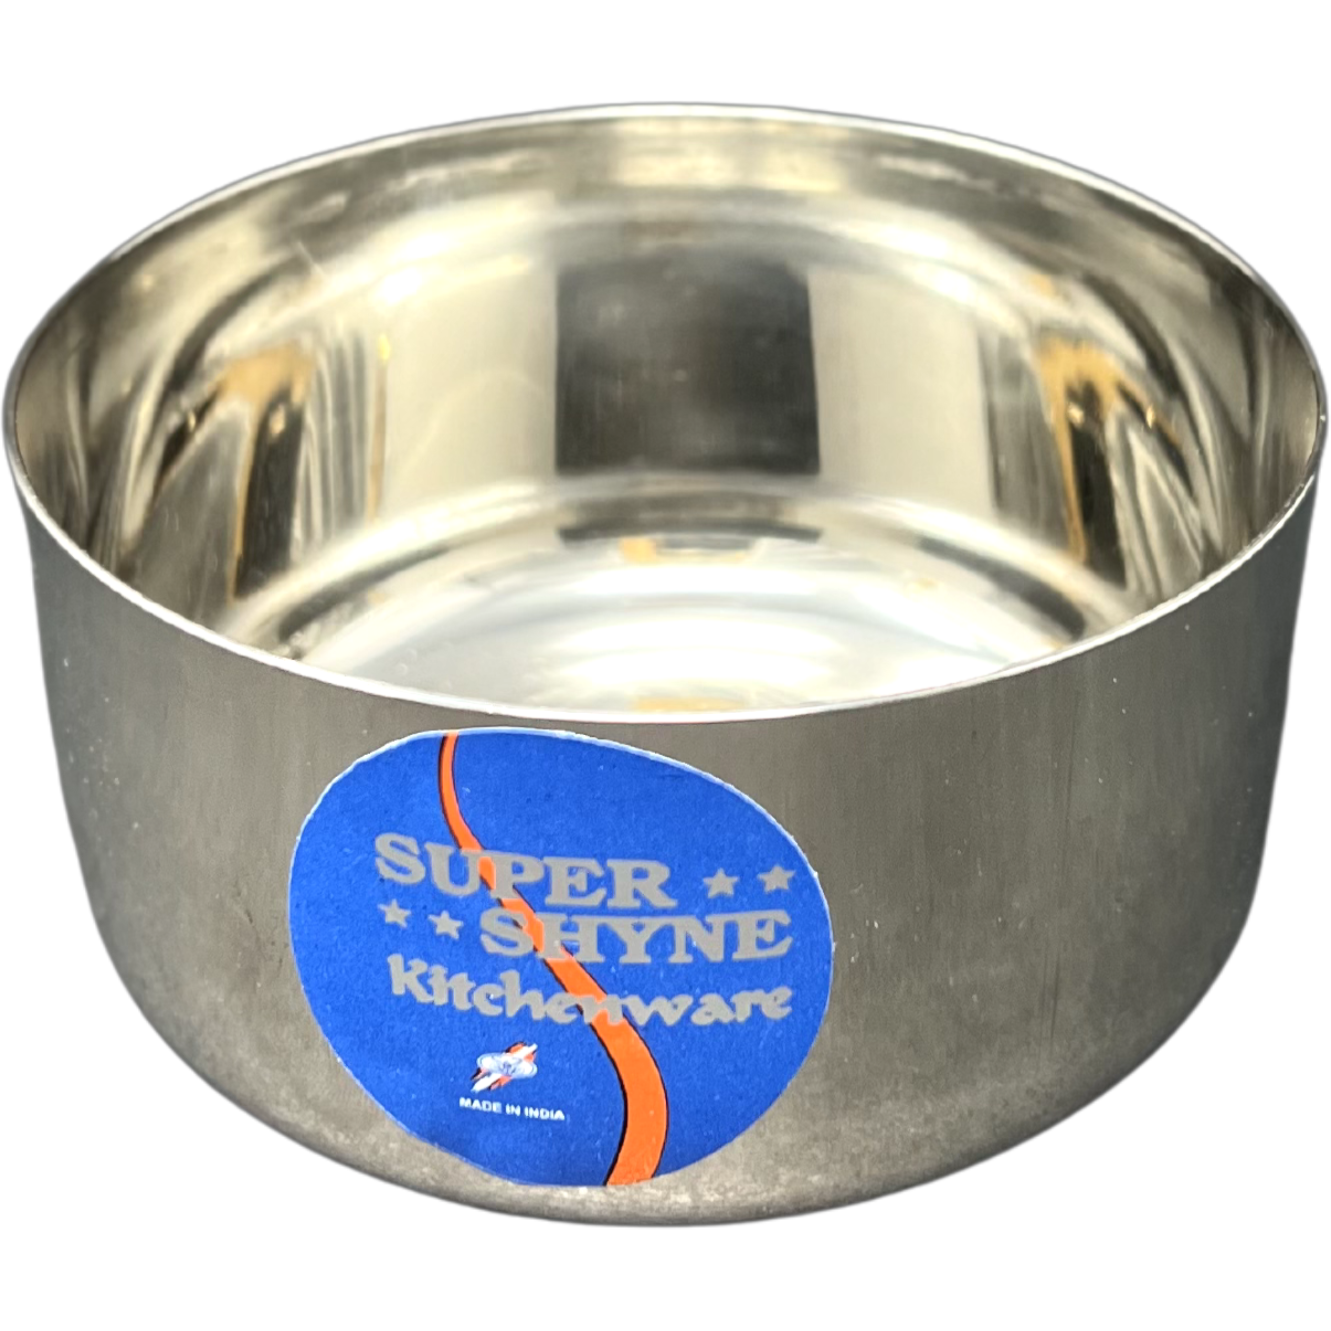 Case of 12 - Super Shyne Stainless Steel Mini Bowl - 2.5 Inch